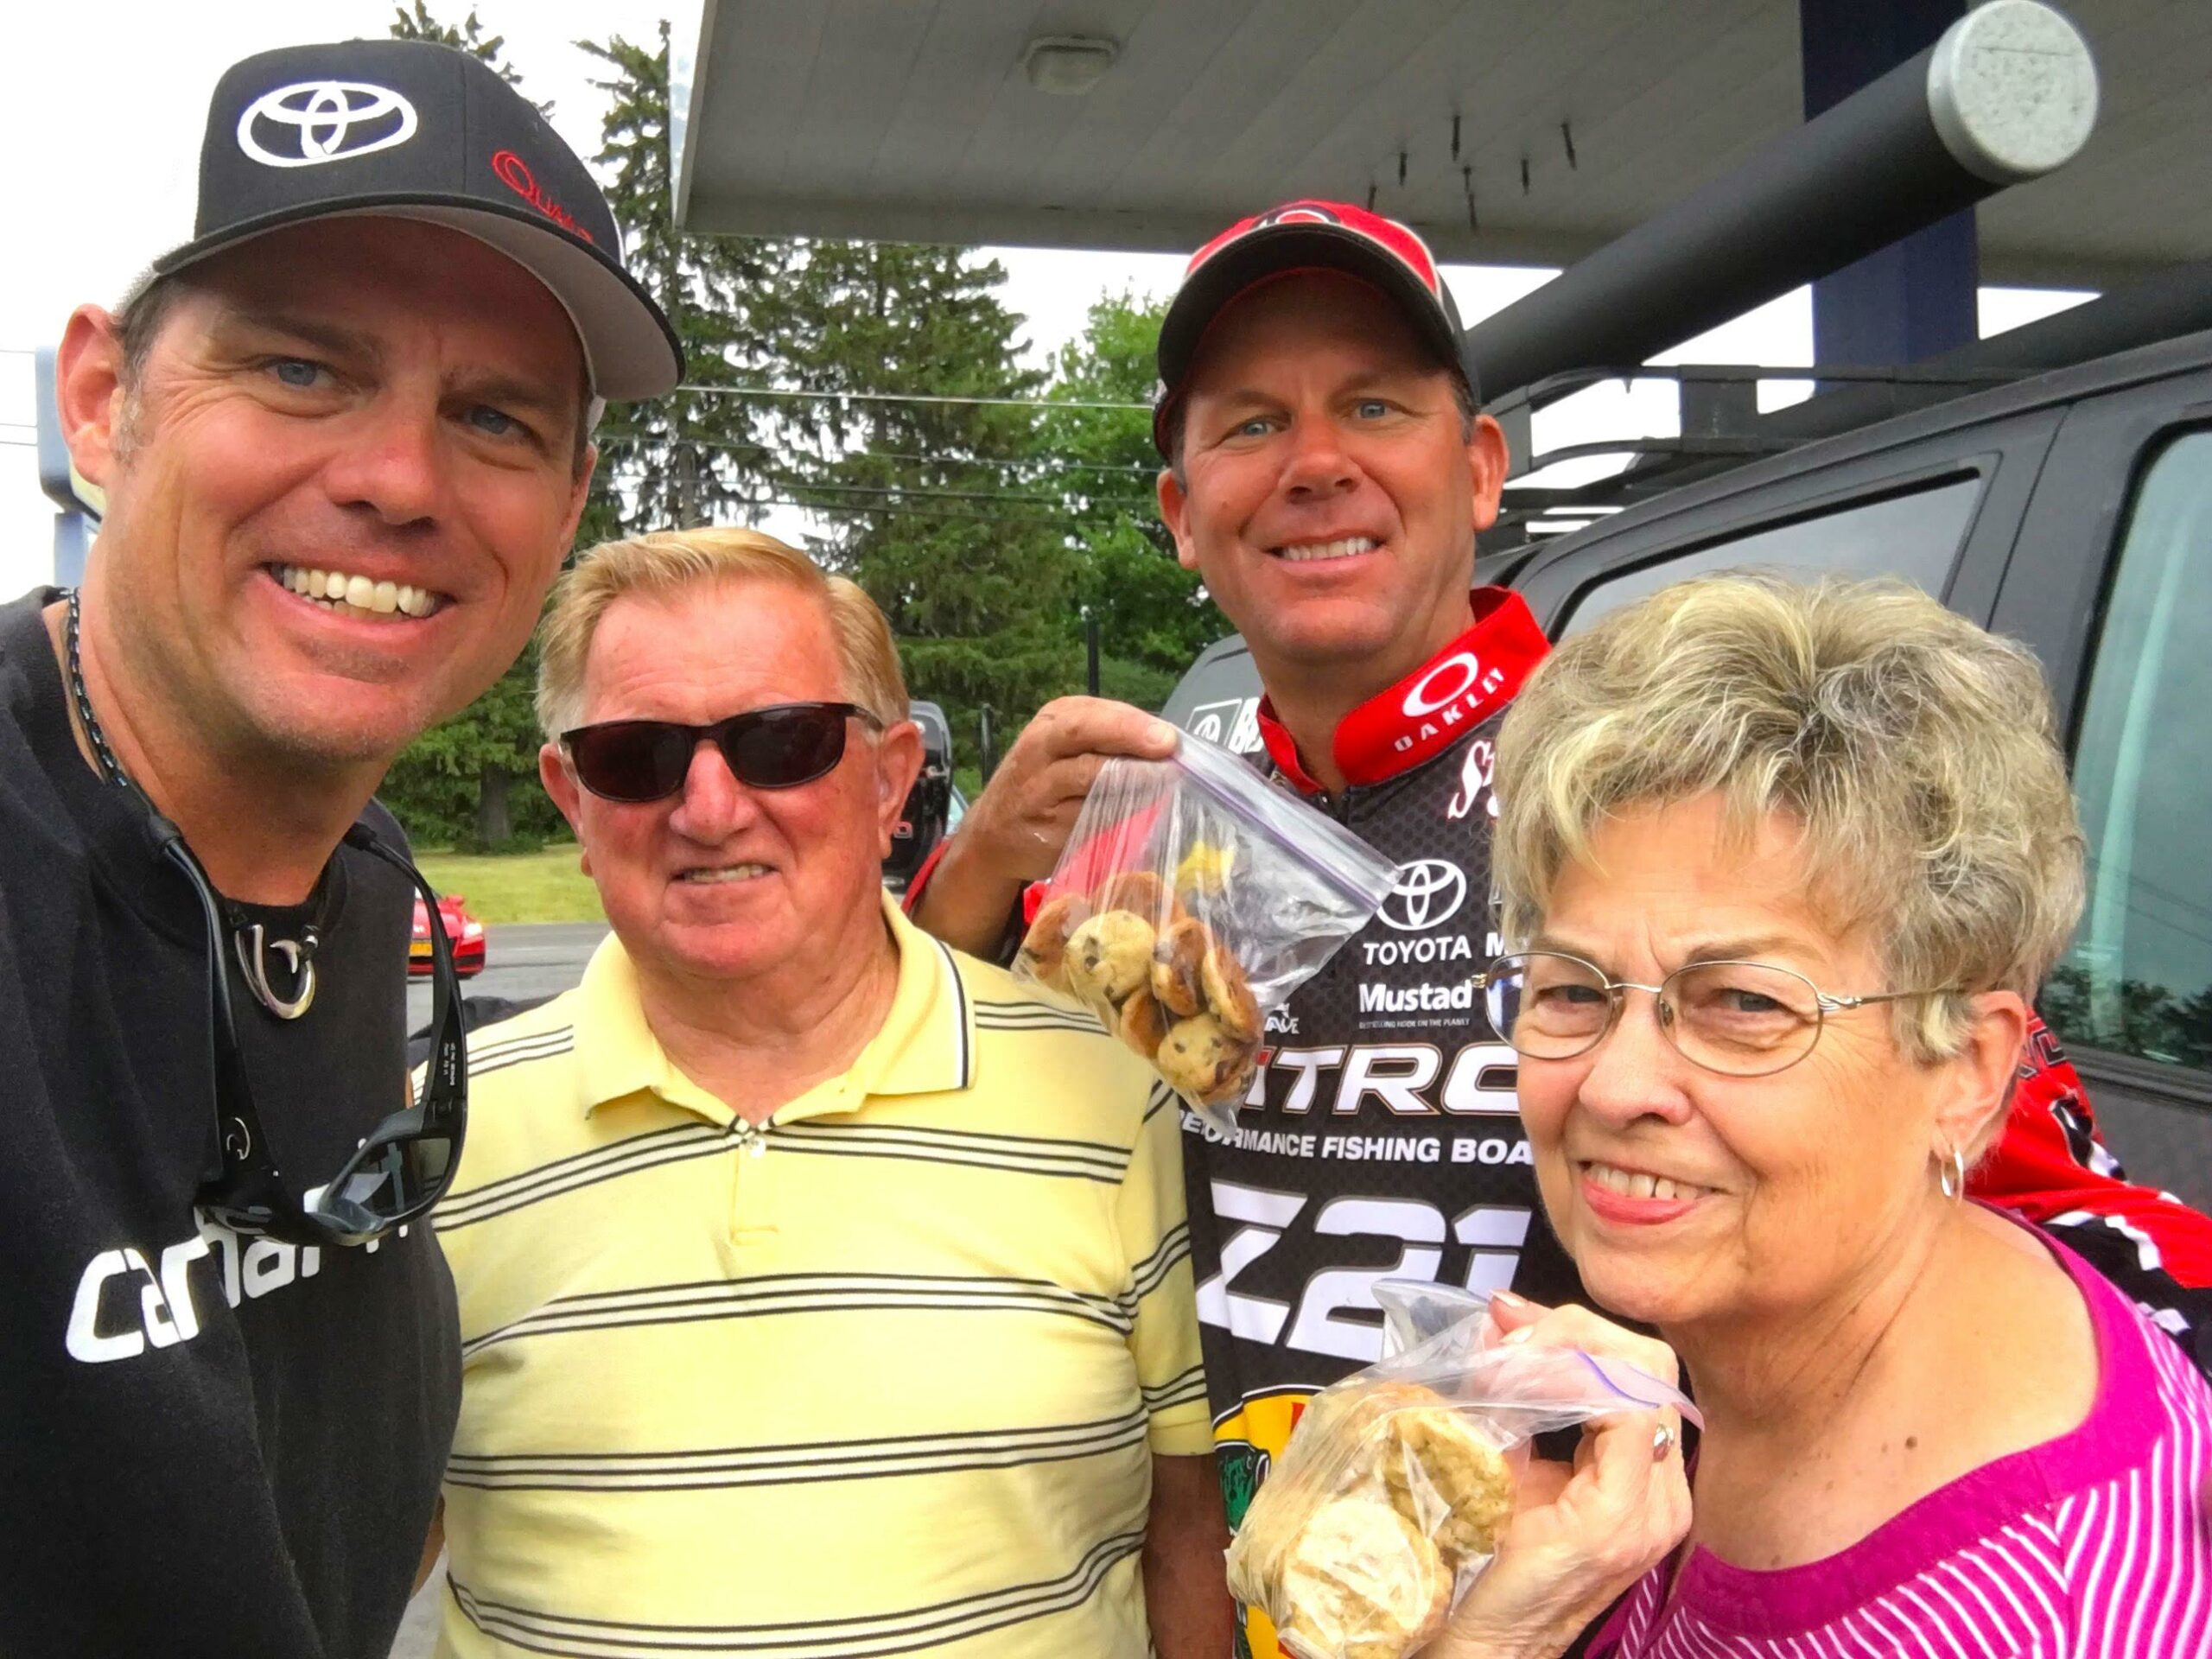 How Cookies May Have Fueled Kevin VanDam’s Fishing Resurgence